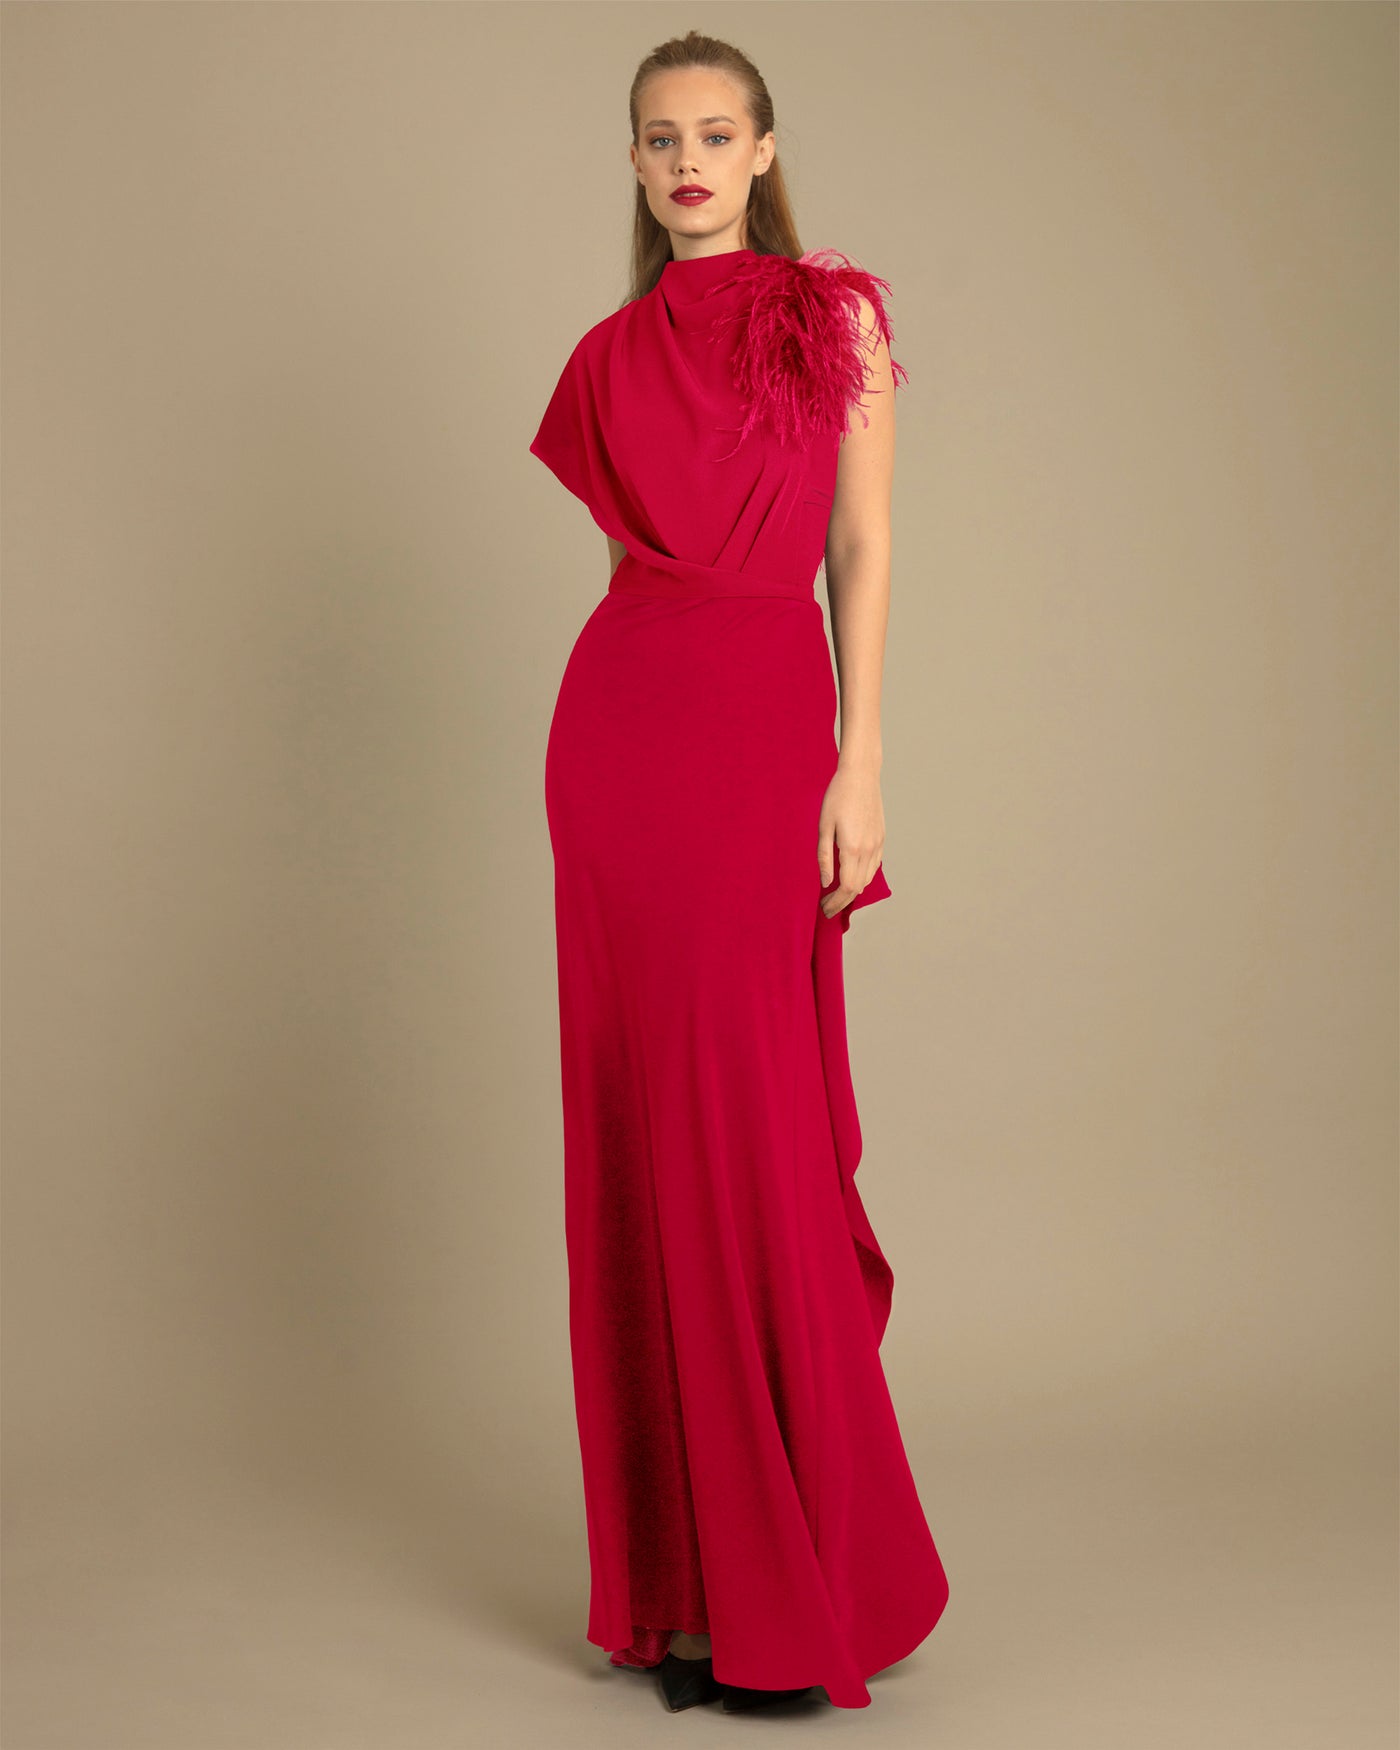 Red Asymmetrical Feathered Crepe Dress